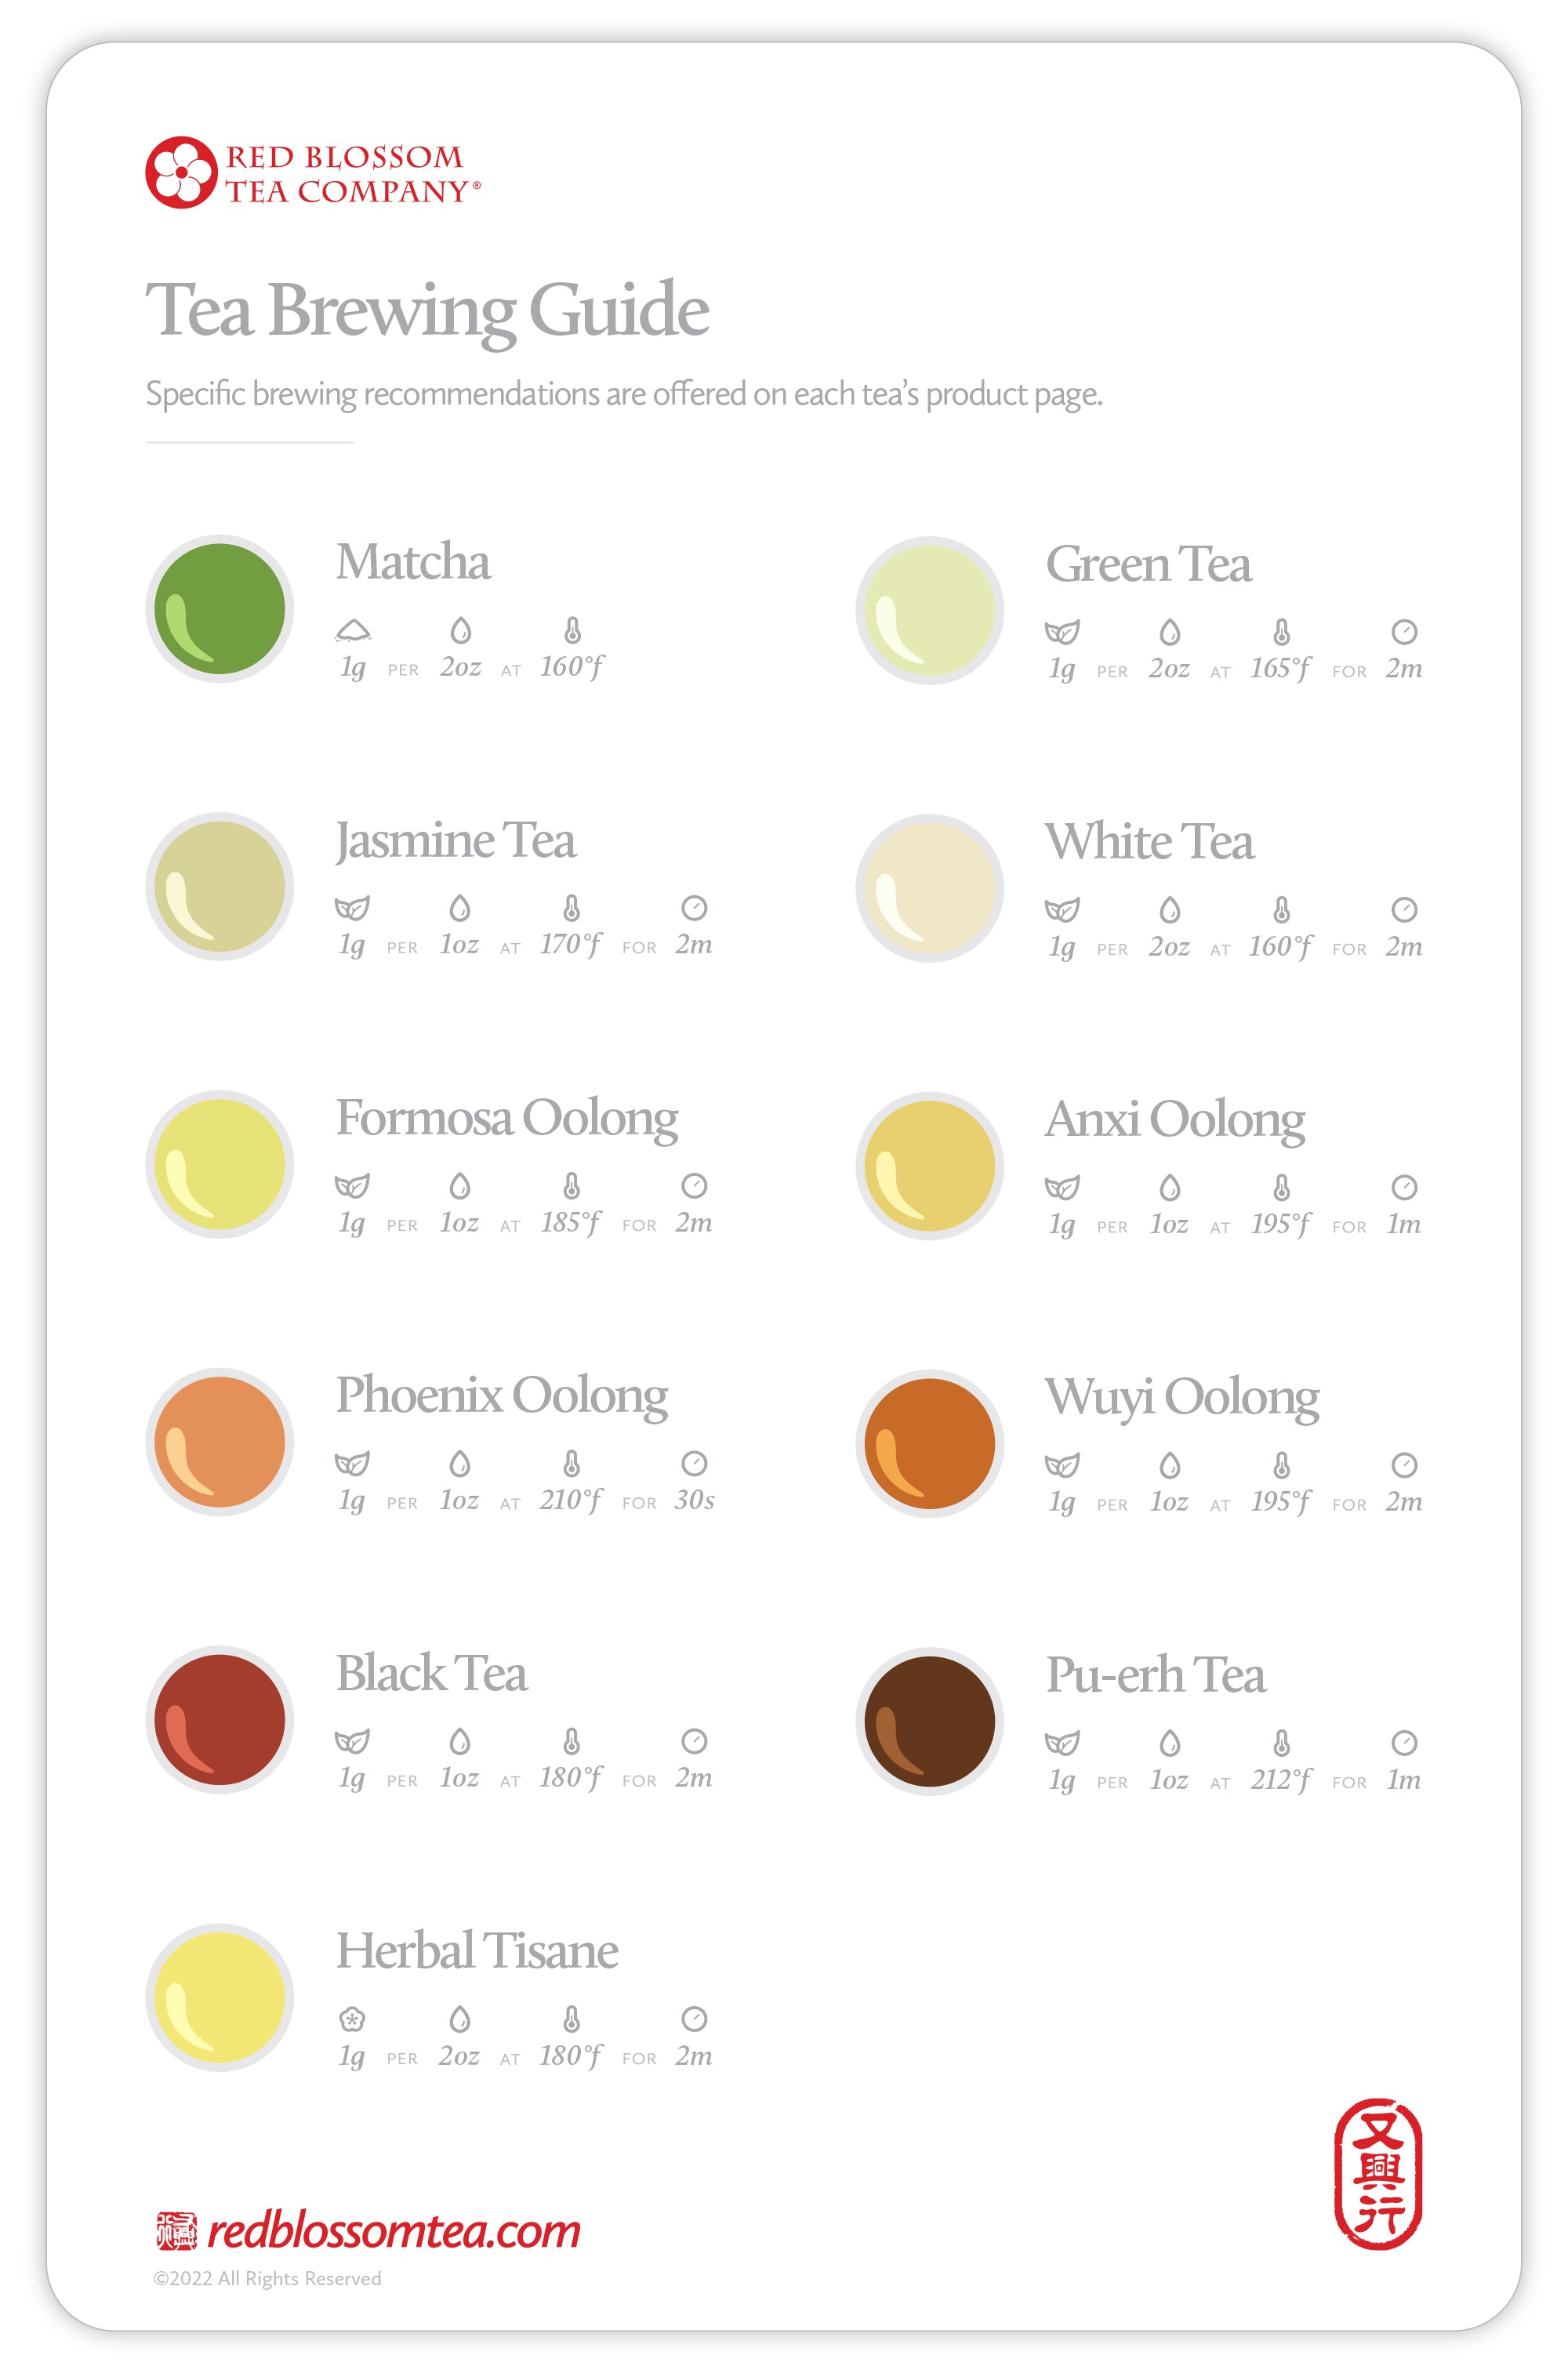 How To Brew Loose Leaf Tea: Steeping Instructions and Required Teaware